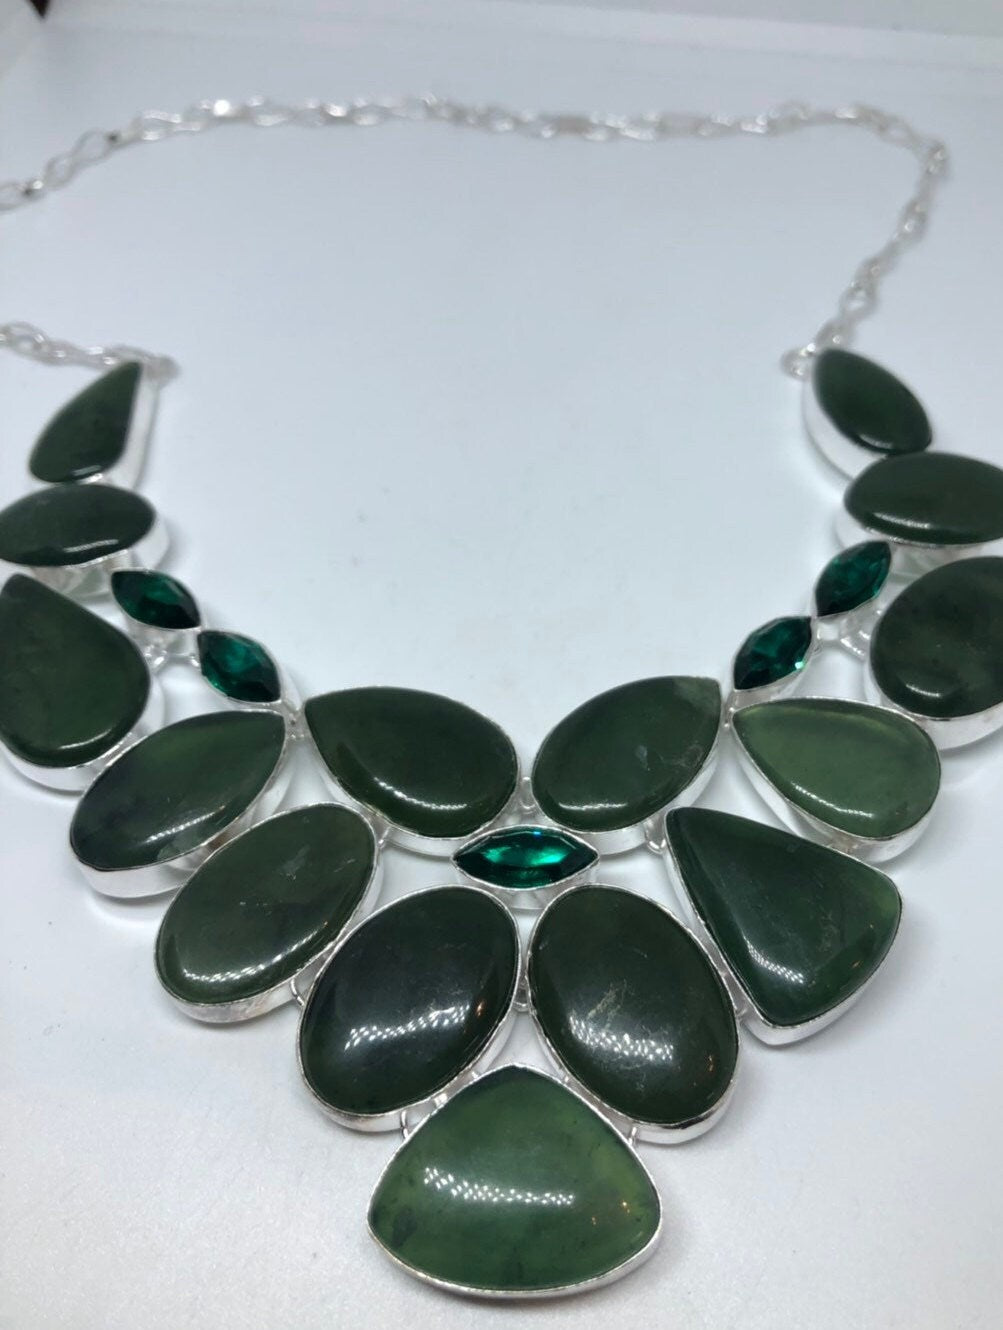 Green Handmade Gothic Styled Silver Finished Genuine Facetted Antique Glass and Nephrite Jade Collar Bib Necklace